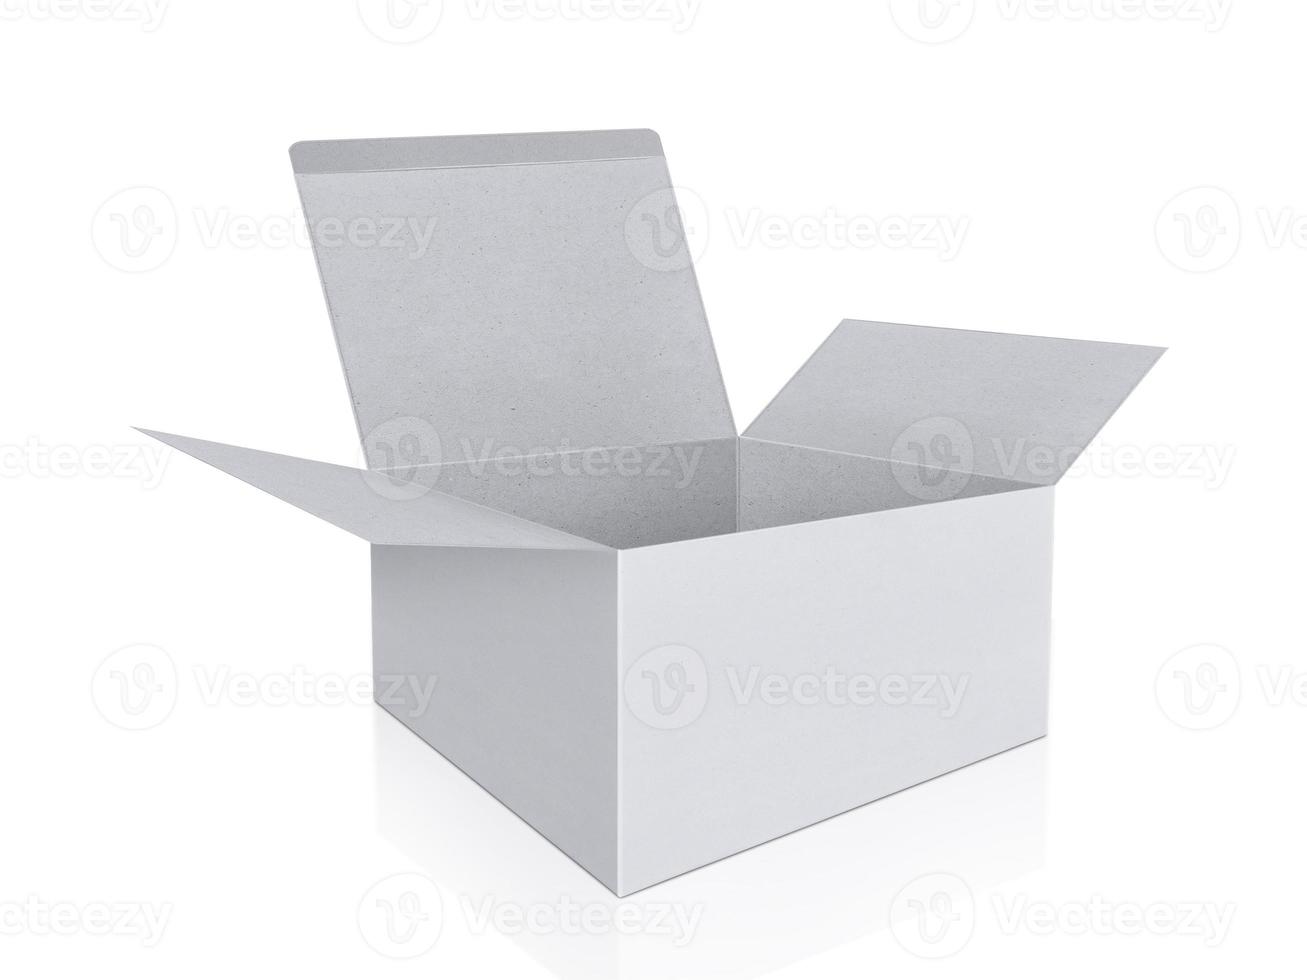 blank packaging boxes - open mockup, isolated on white background photo